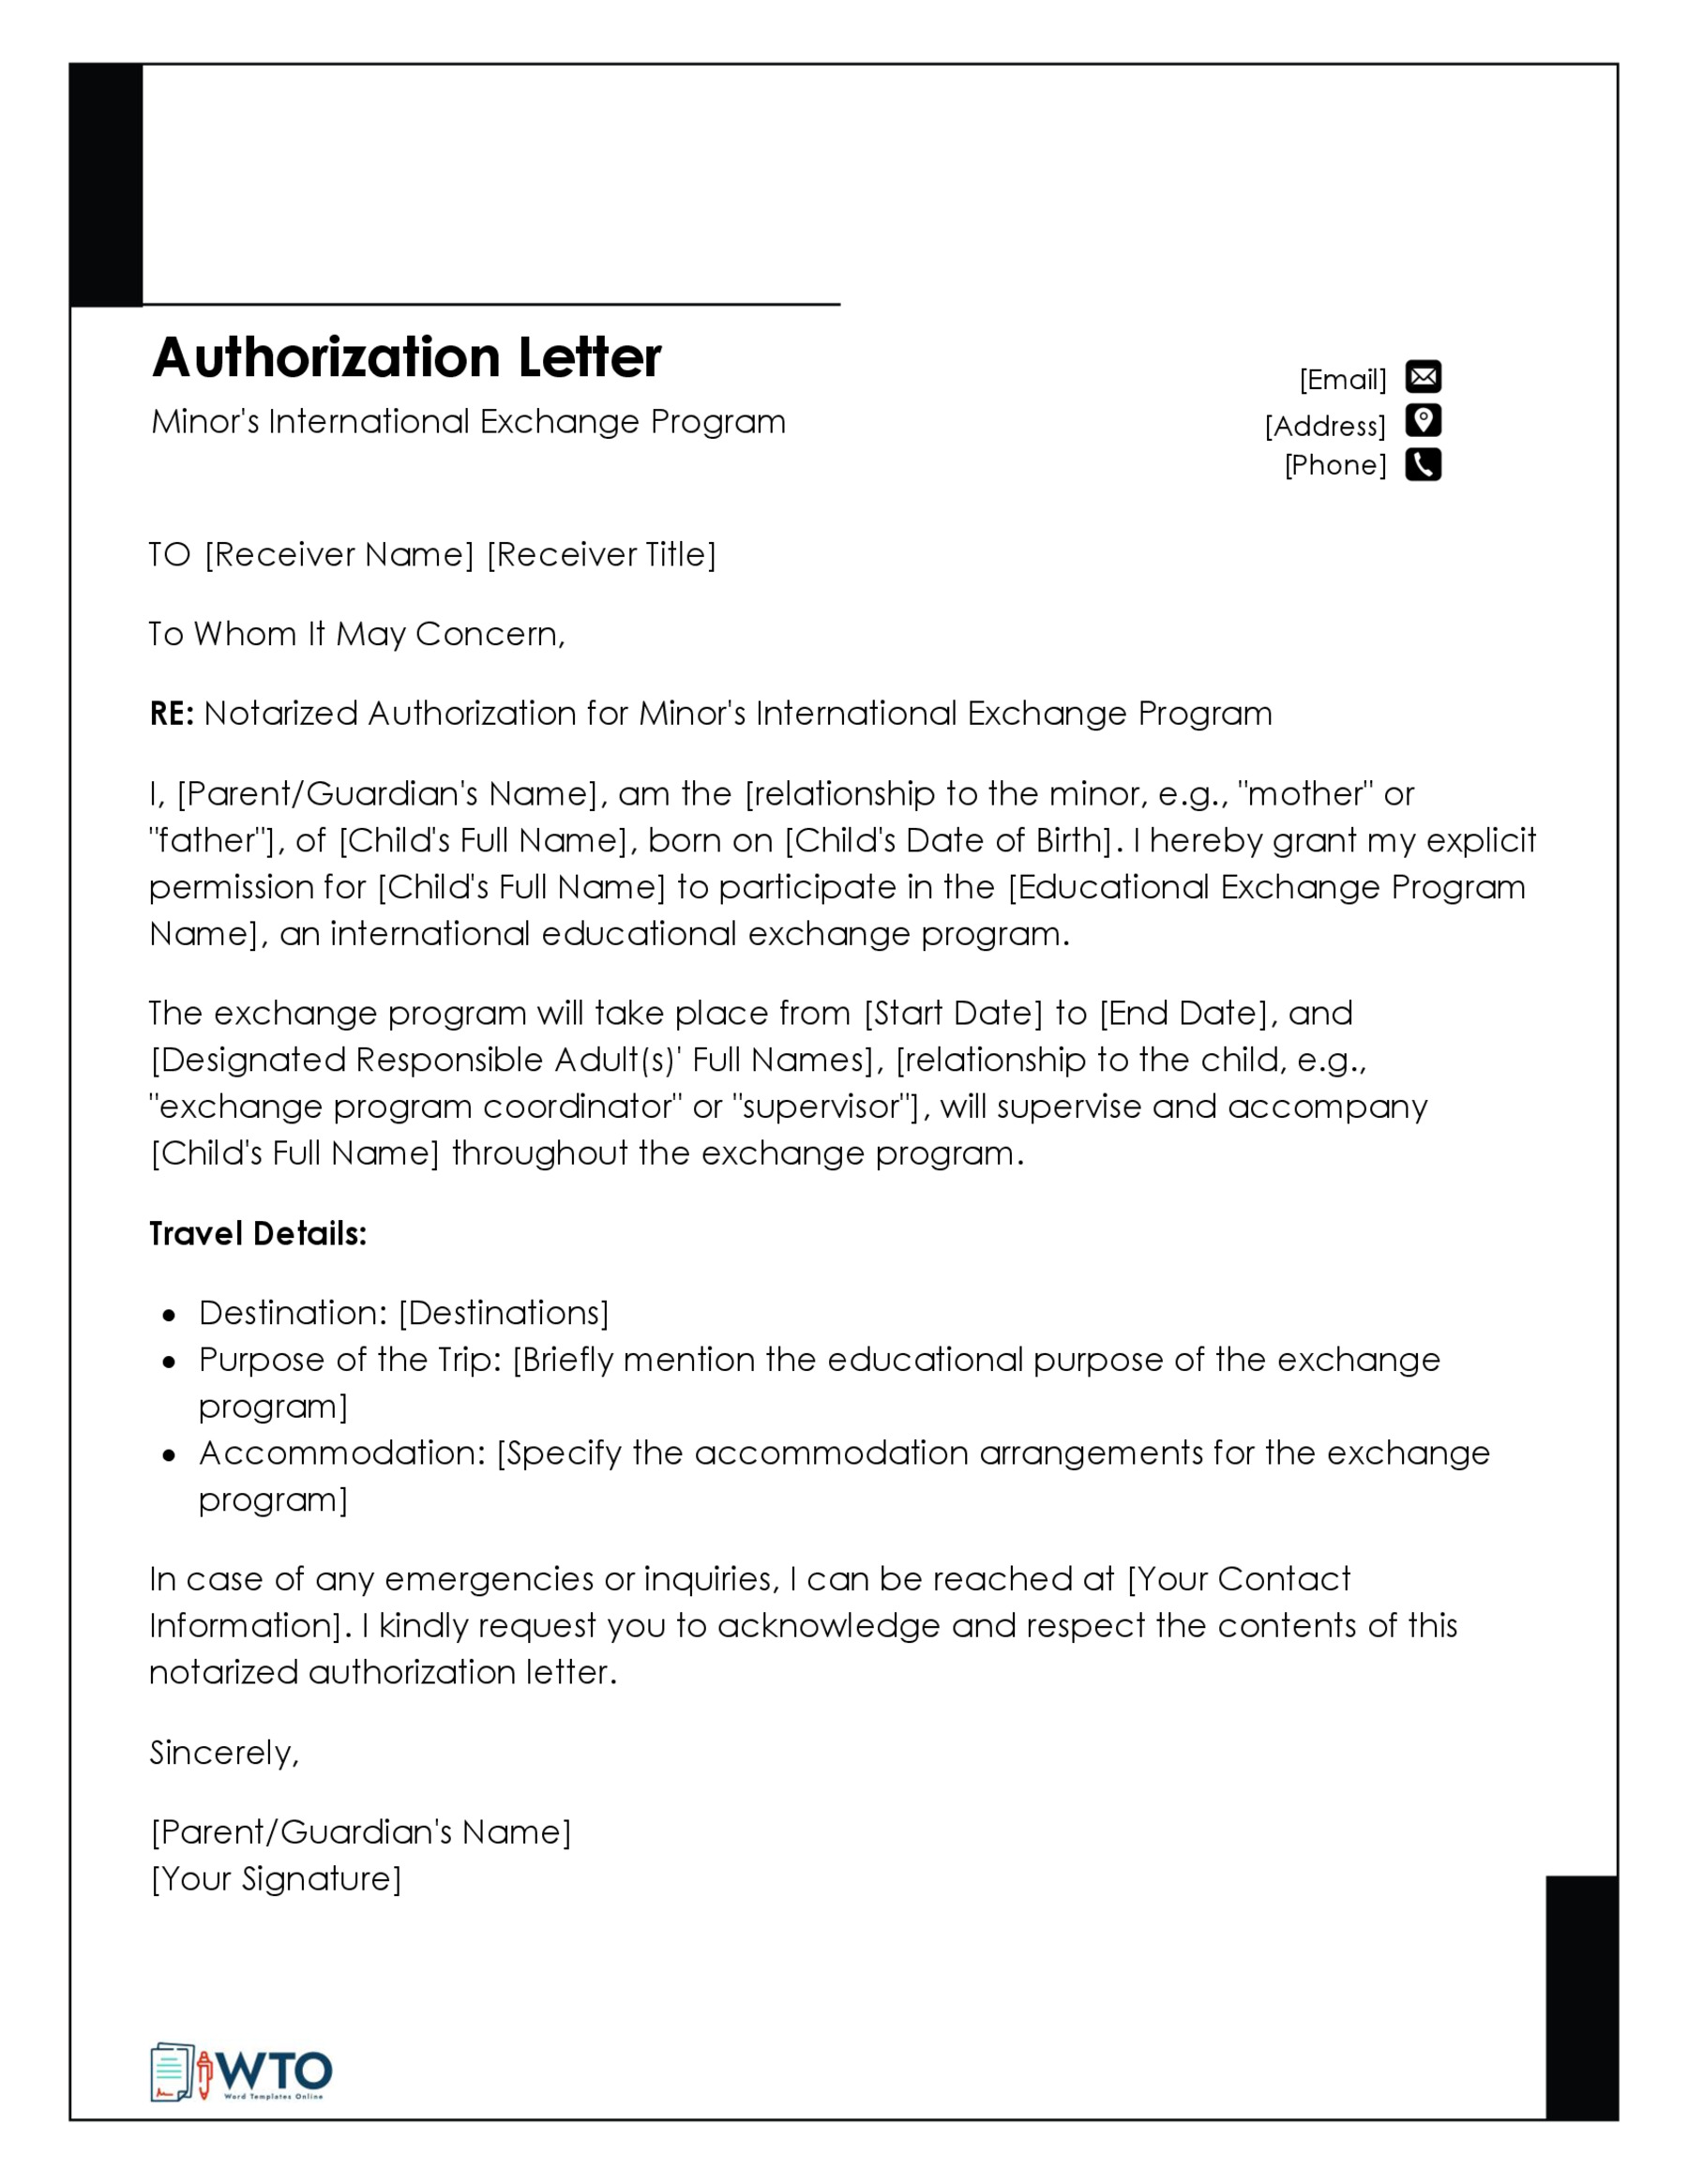 Authorization Letter toTravel with Minor Template-Ms word Format